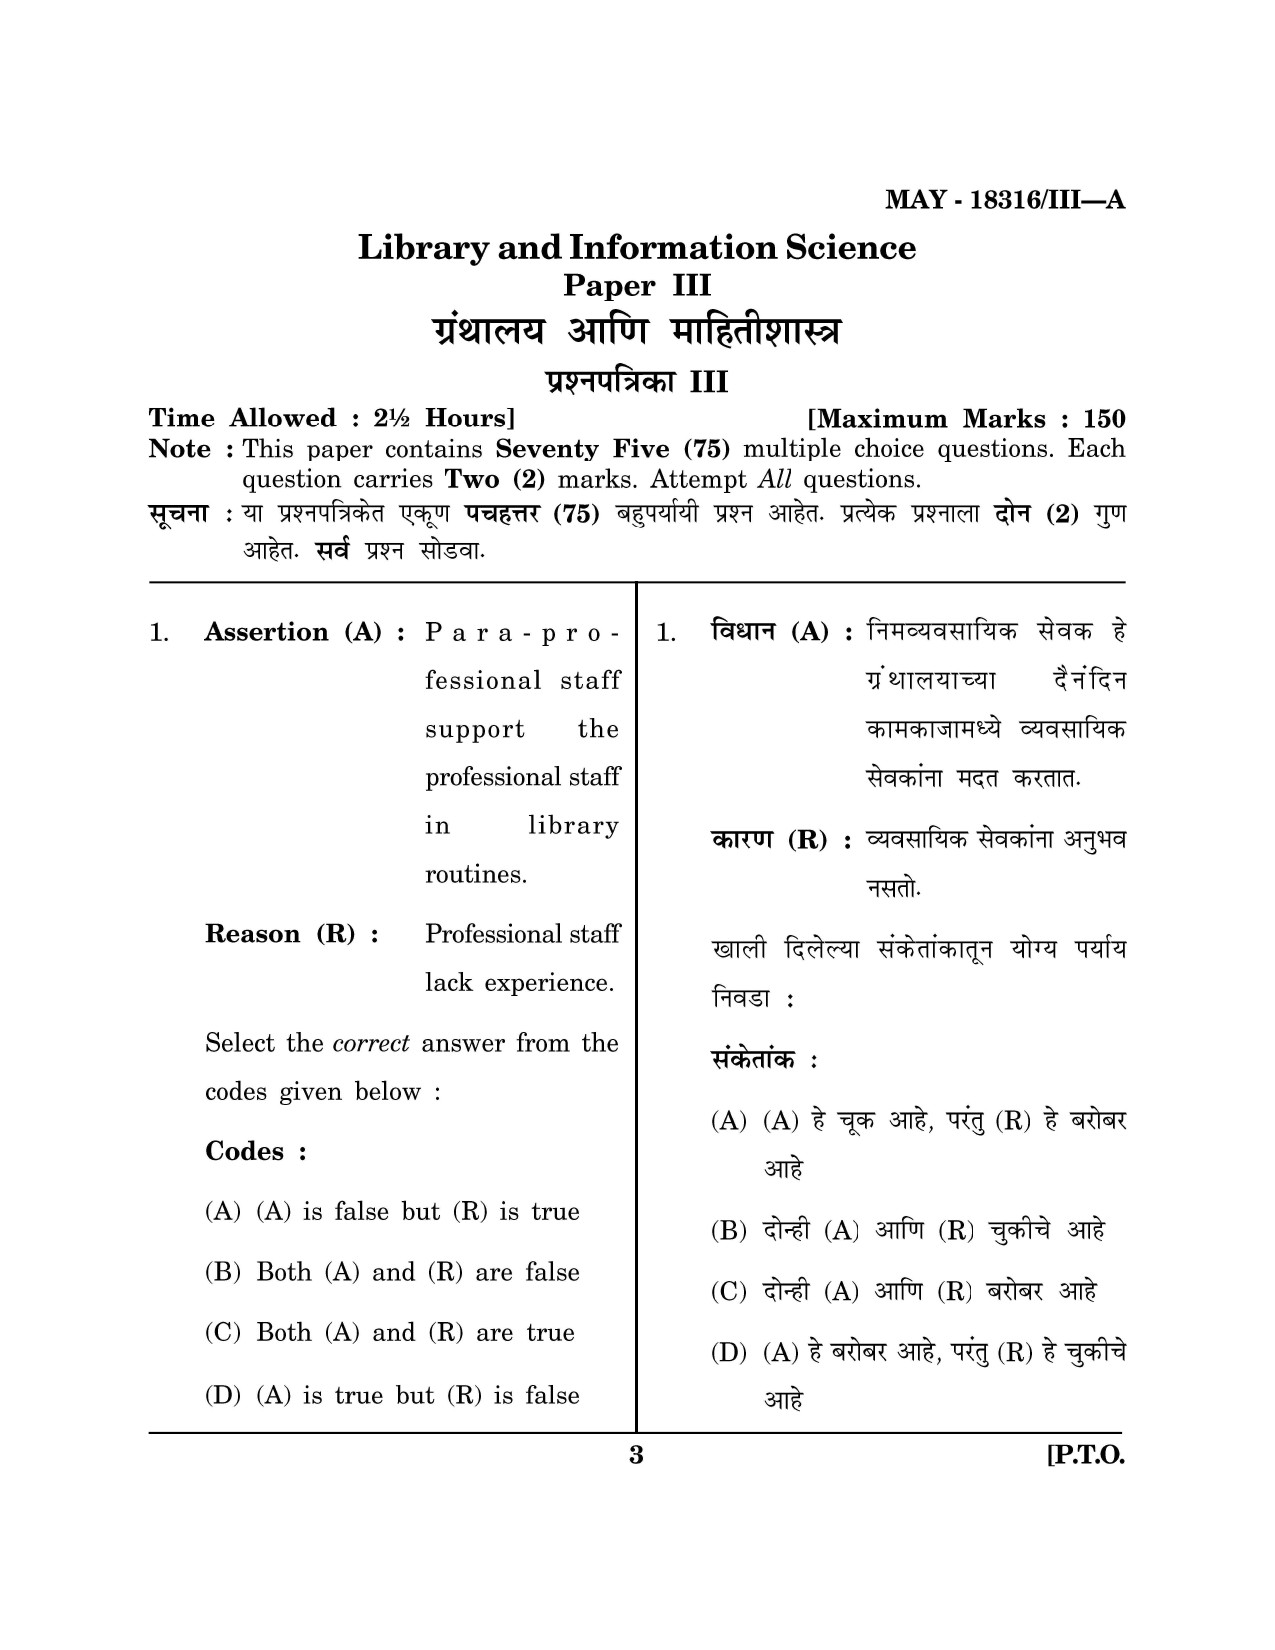 Maharashtra SET Library Information Science Question Paper III May 2016 2